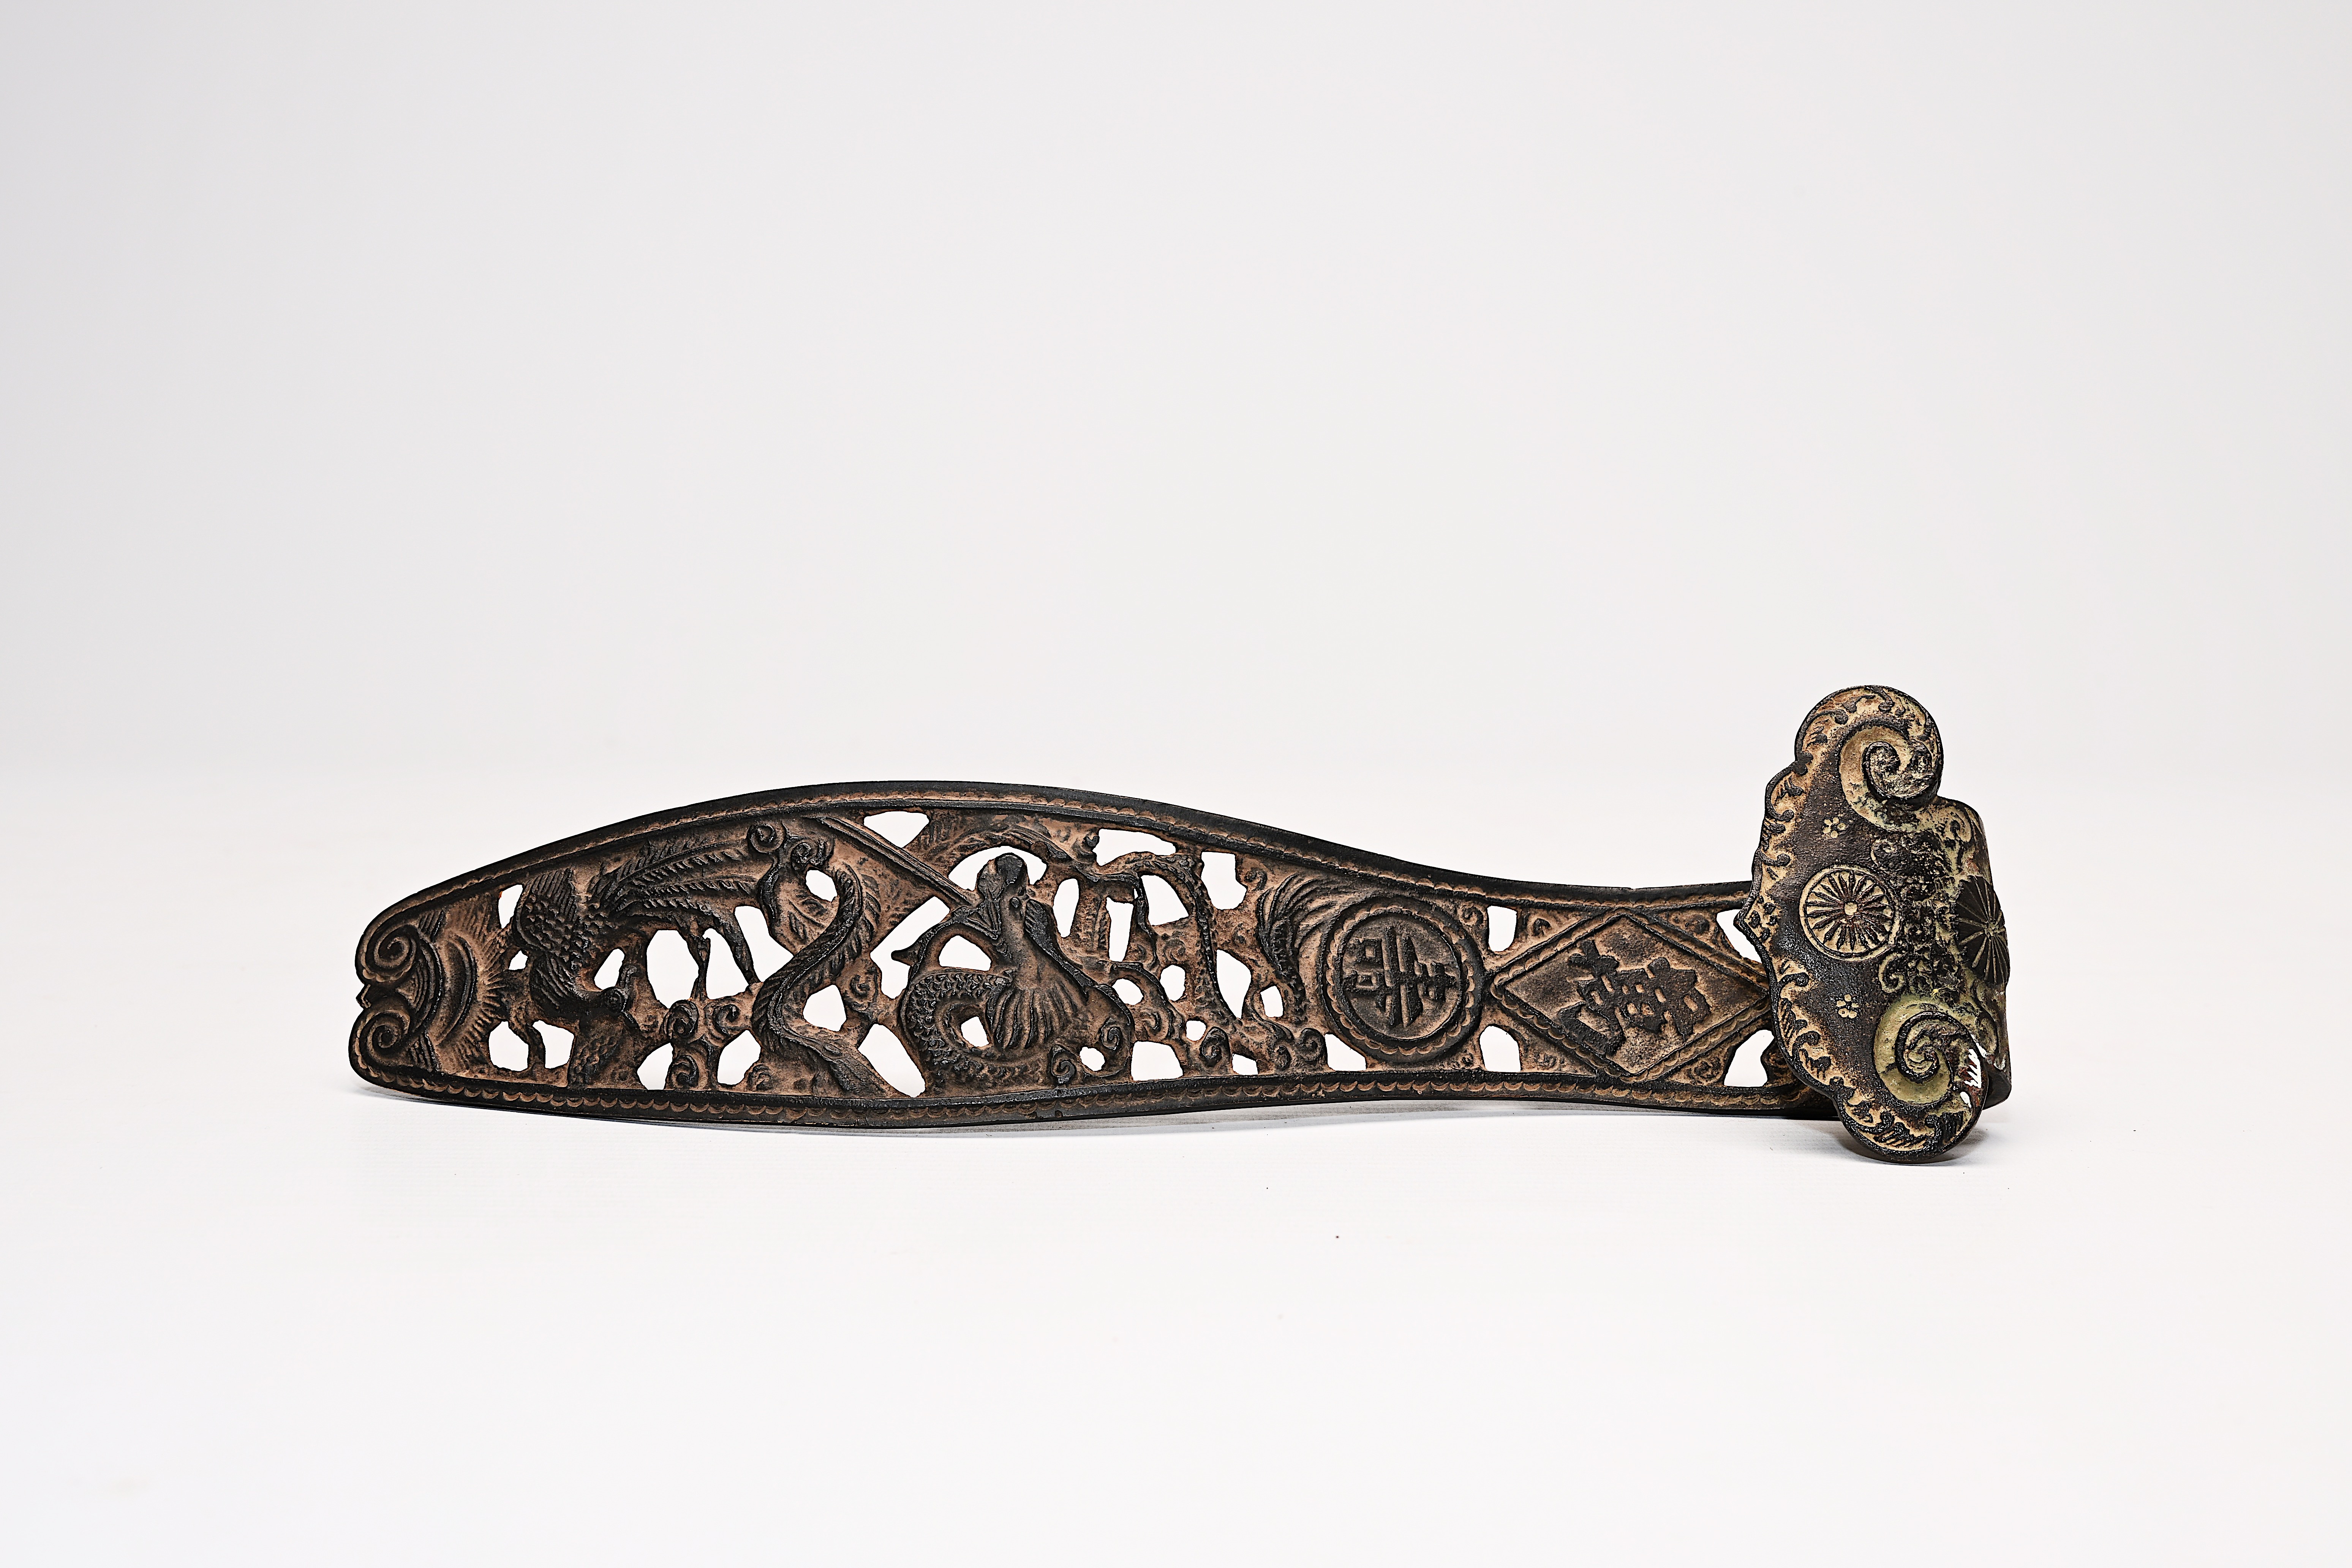 A Chinese bronze 'bamboo' plaque, a jade stamp and a bronze ruyi sceptre, 20th C. - Image 3 of 4